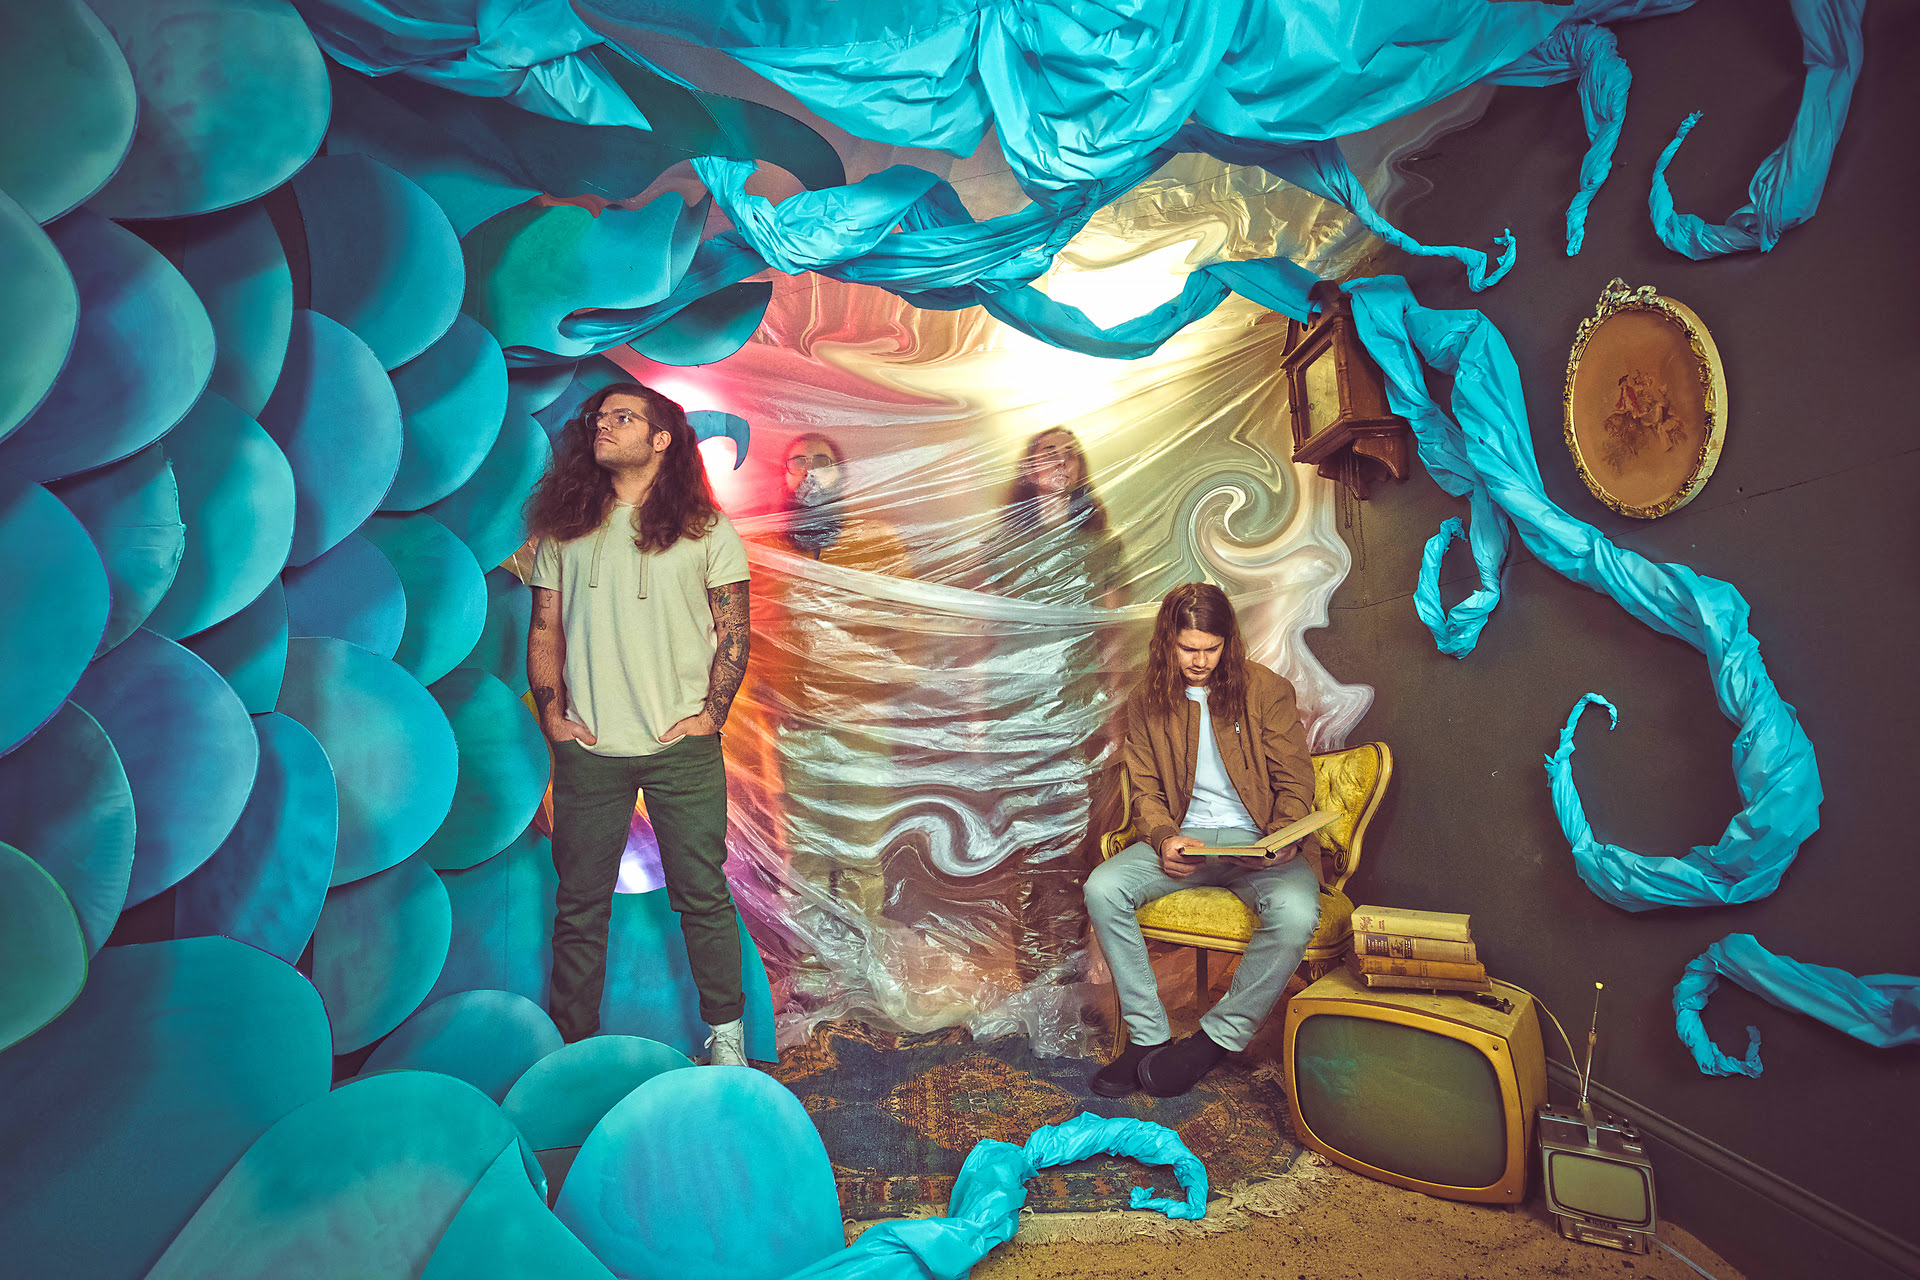 Astronoid to release sophomore album in February